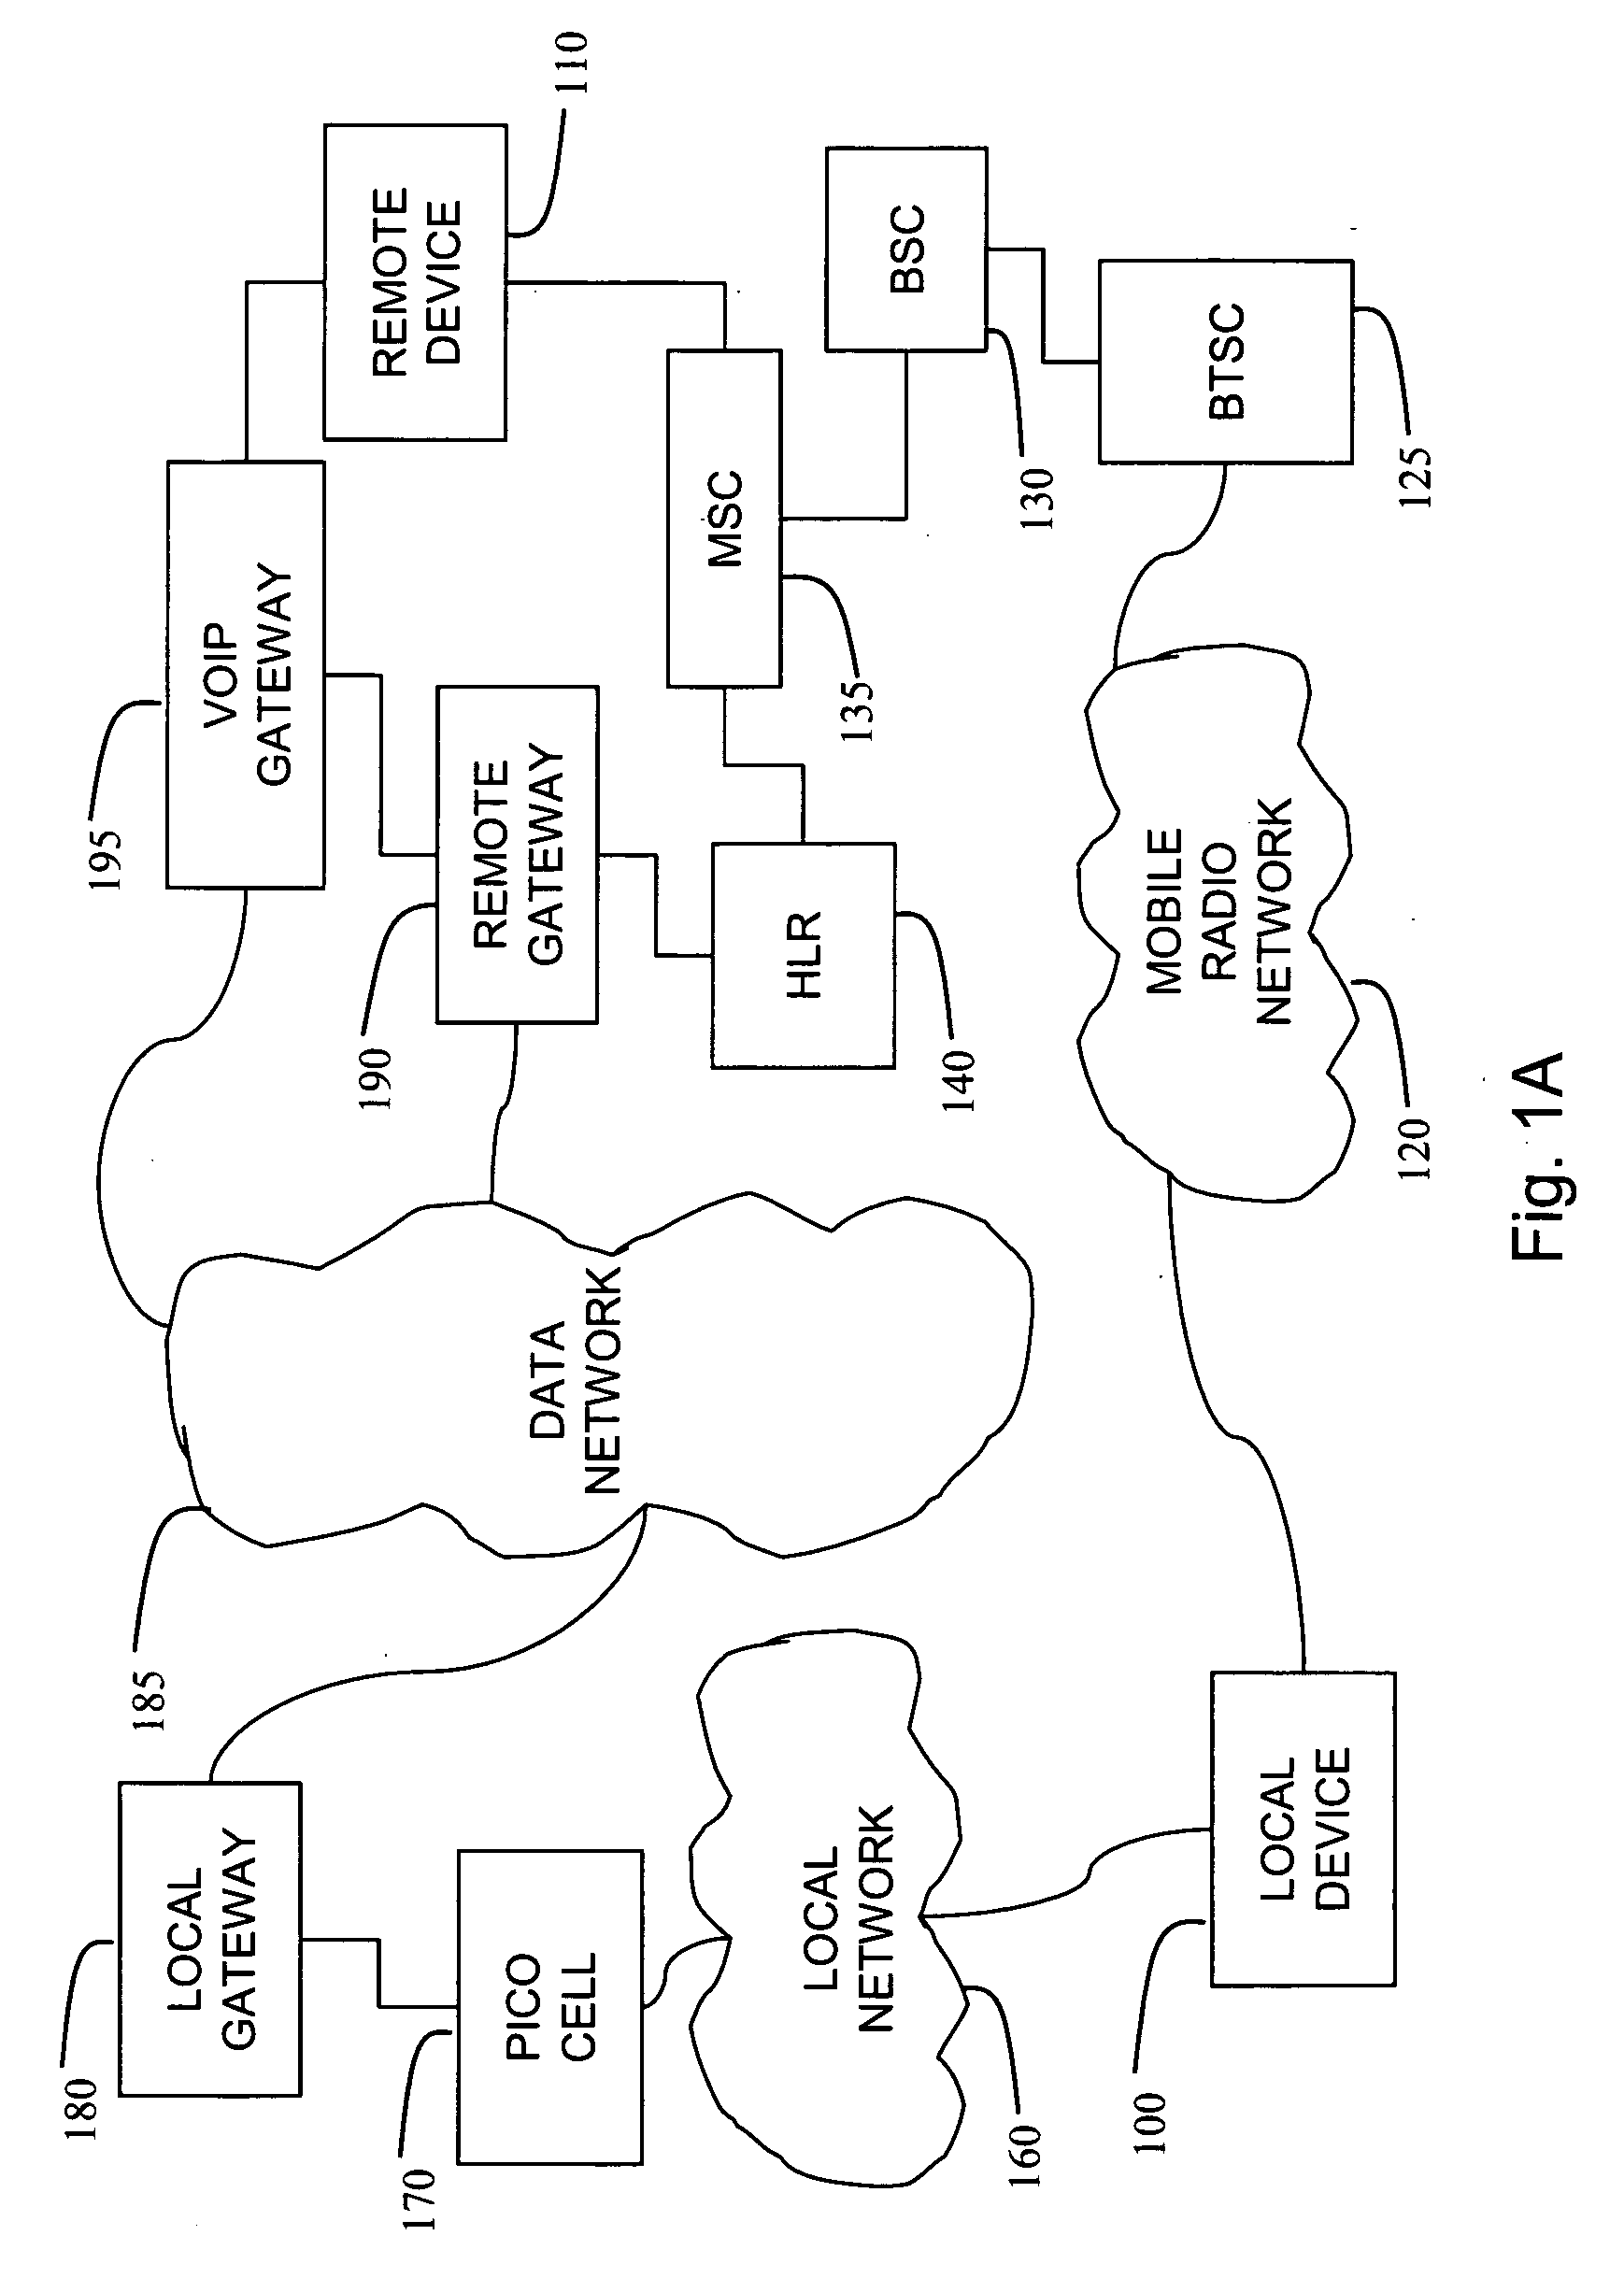 Local access to a mobile network